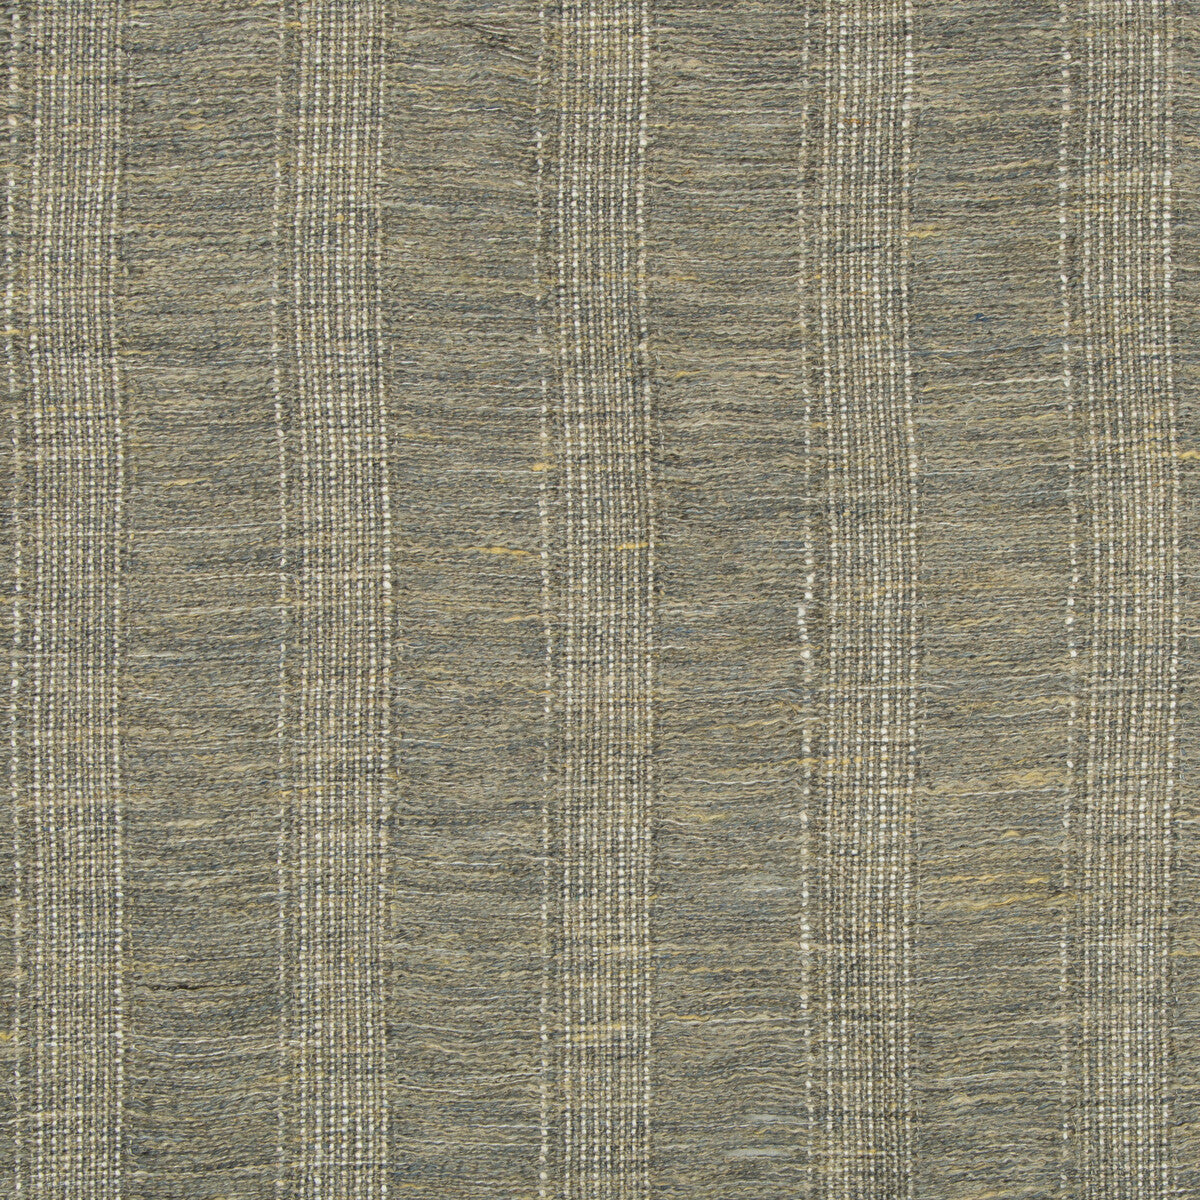 Fermata fabric in lark color - pattern 4482.11.0 - by Kravet Couture in the Sue Firestone Malibu collection